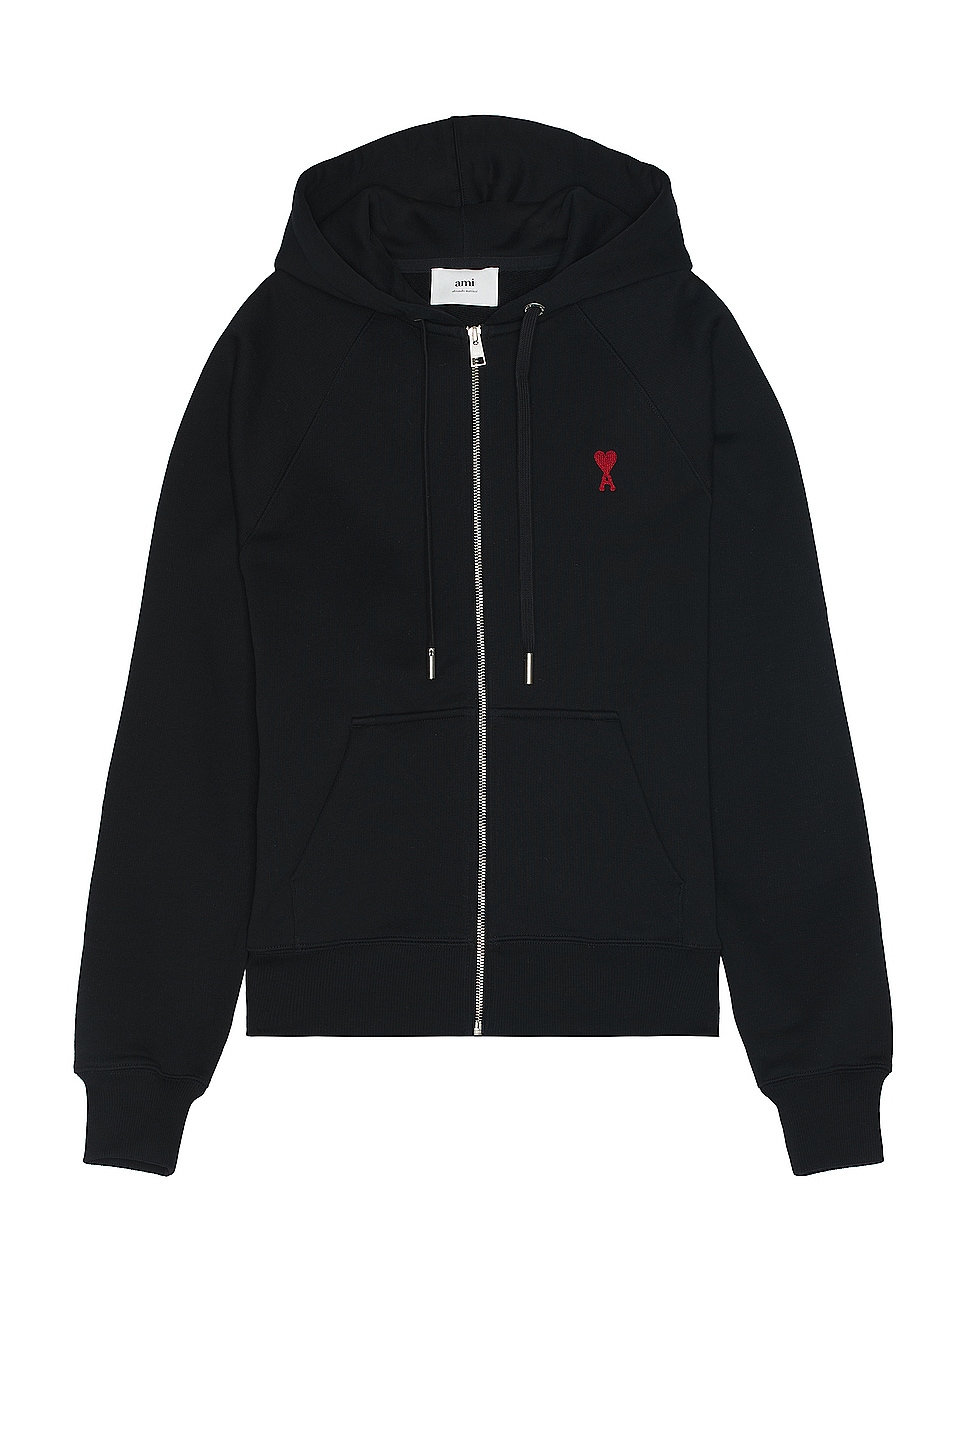 Image 1 of ami ADC Zipped Hoodie in Black